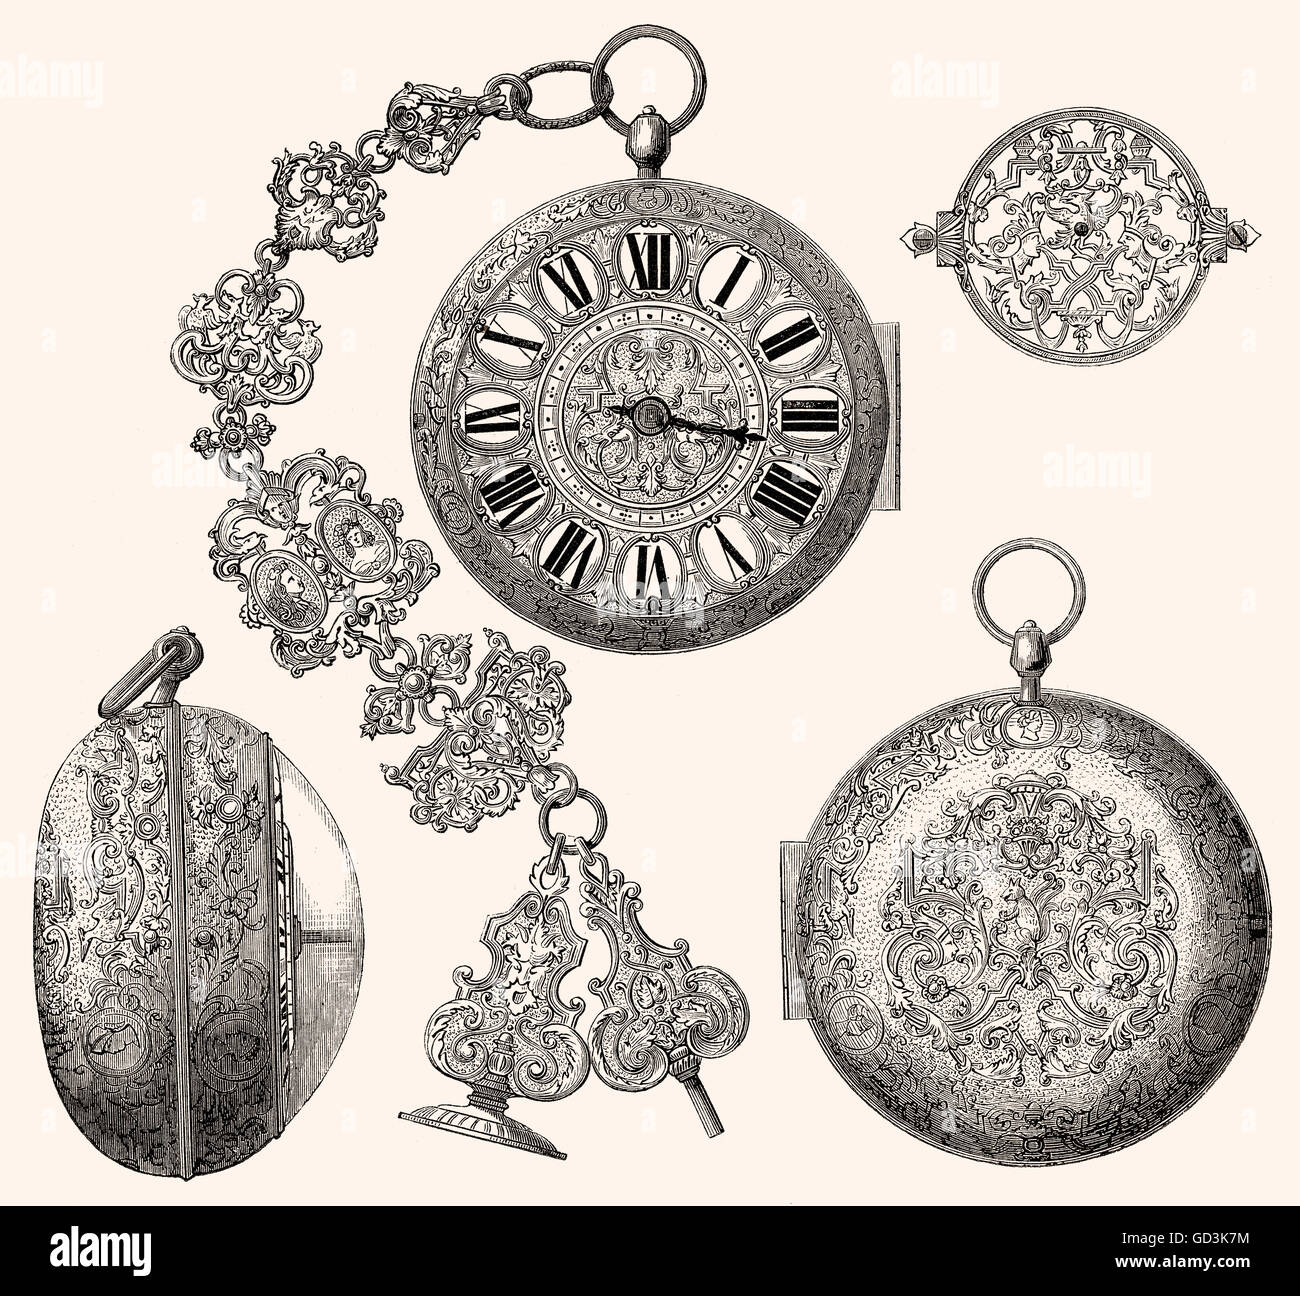 Pocket watch from the 17th century Stock Photo